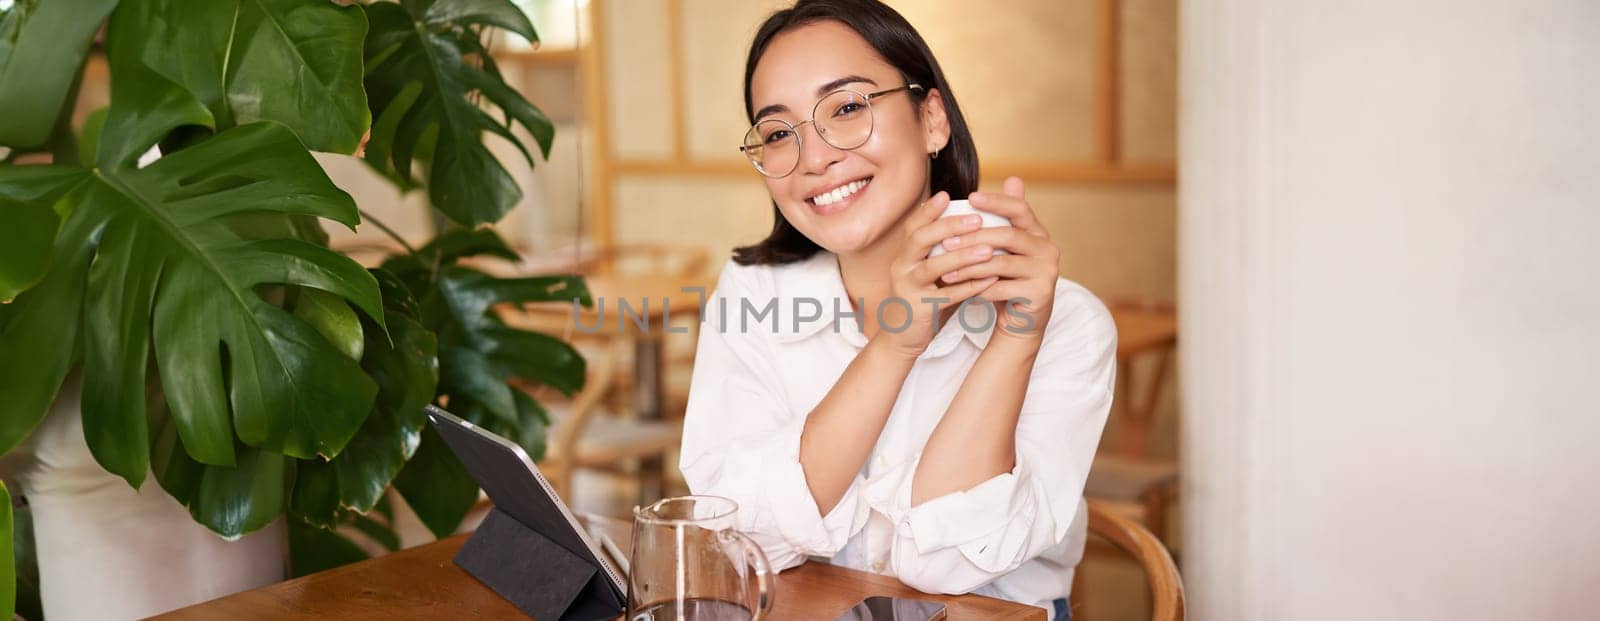 Smiling asian girl in glasses, woman working on remote, drinking coffee and using tablet. Copy space